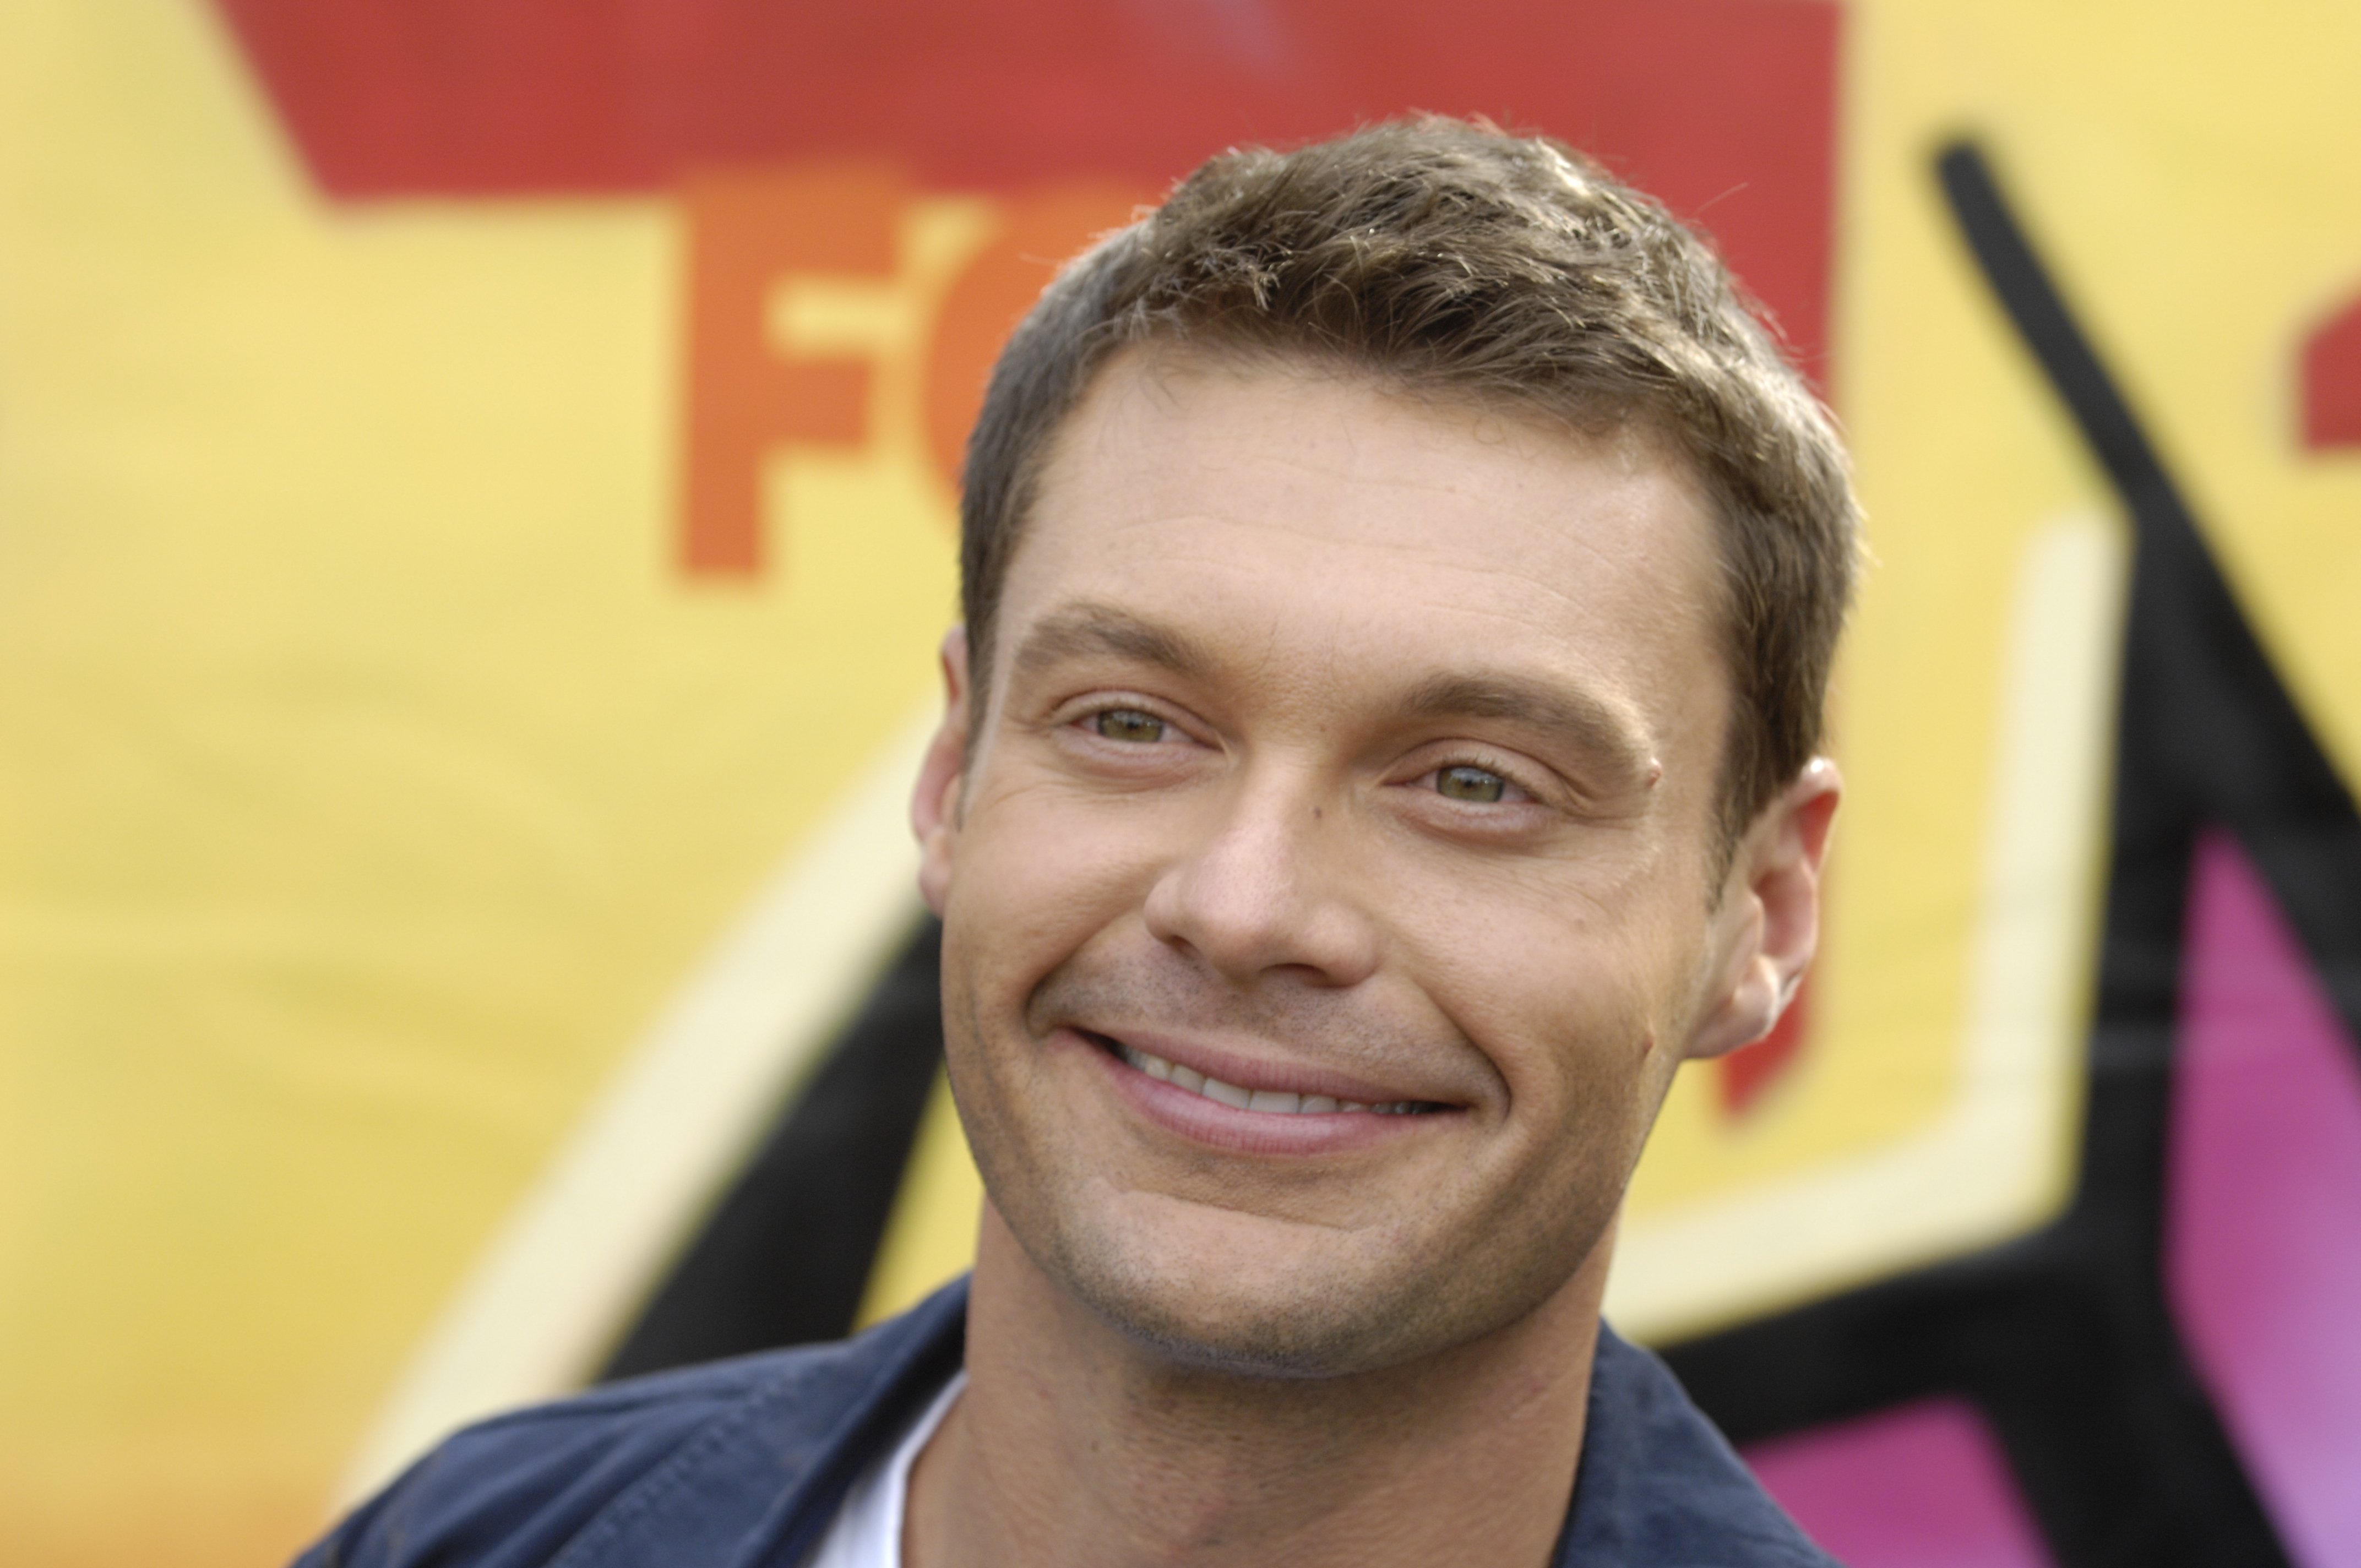 Ryan Seacrest will host ‘Wheel of Fortune’ after Pat Sajak retires next ...